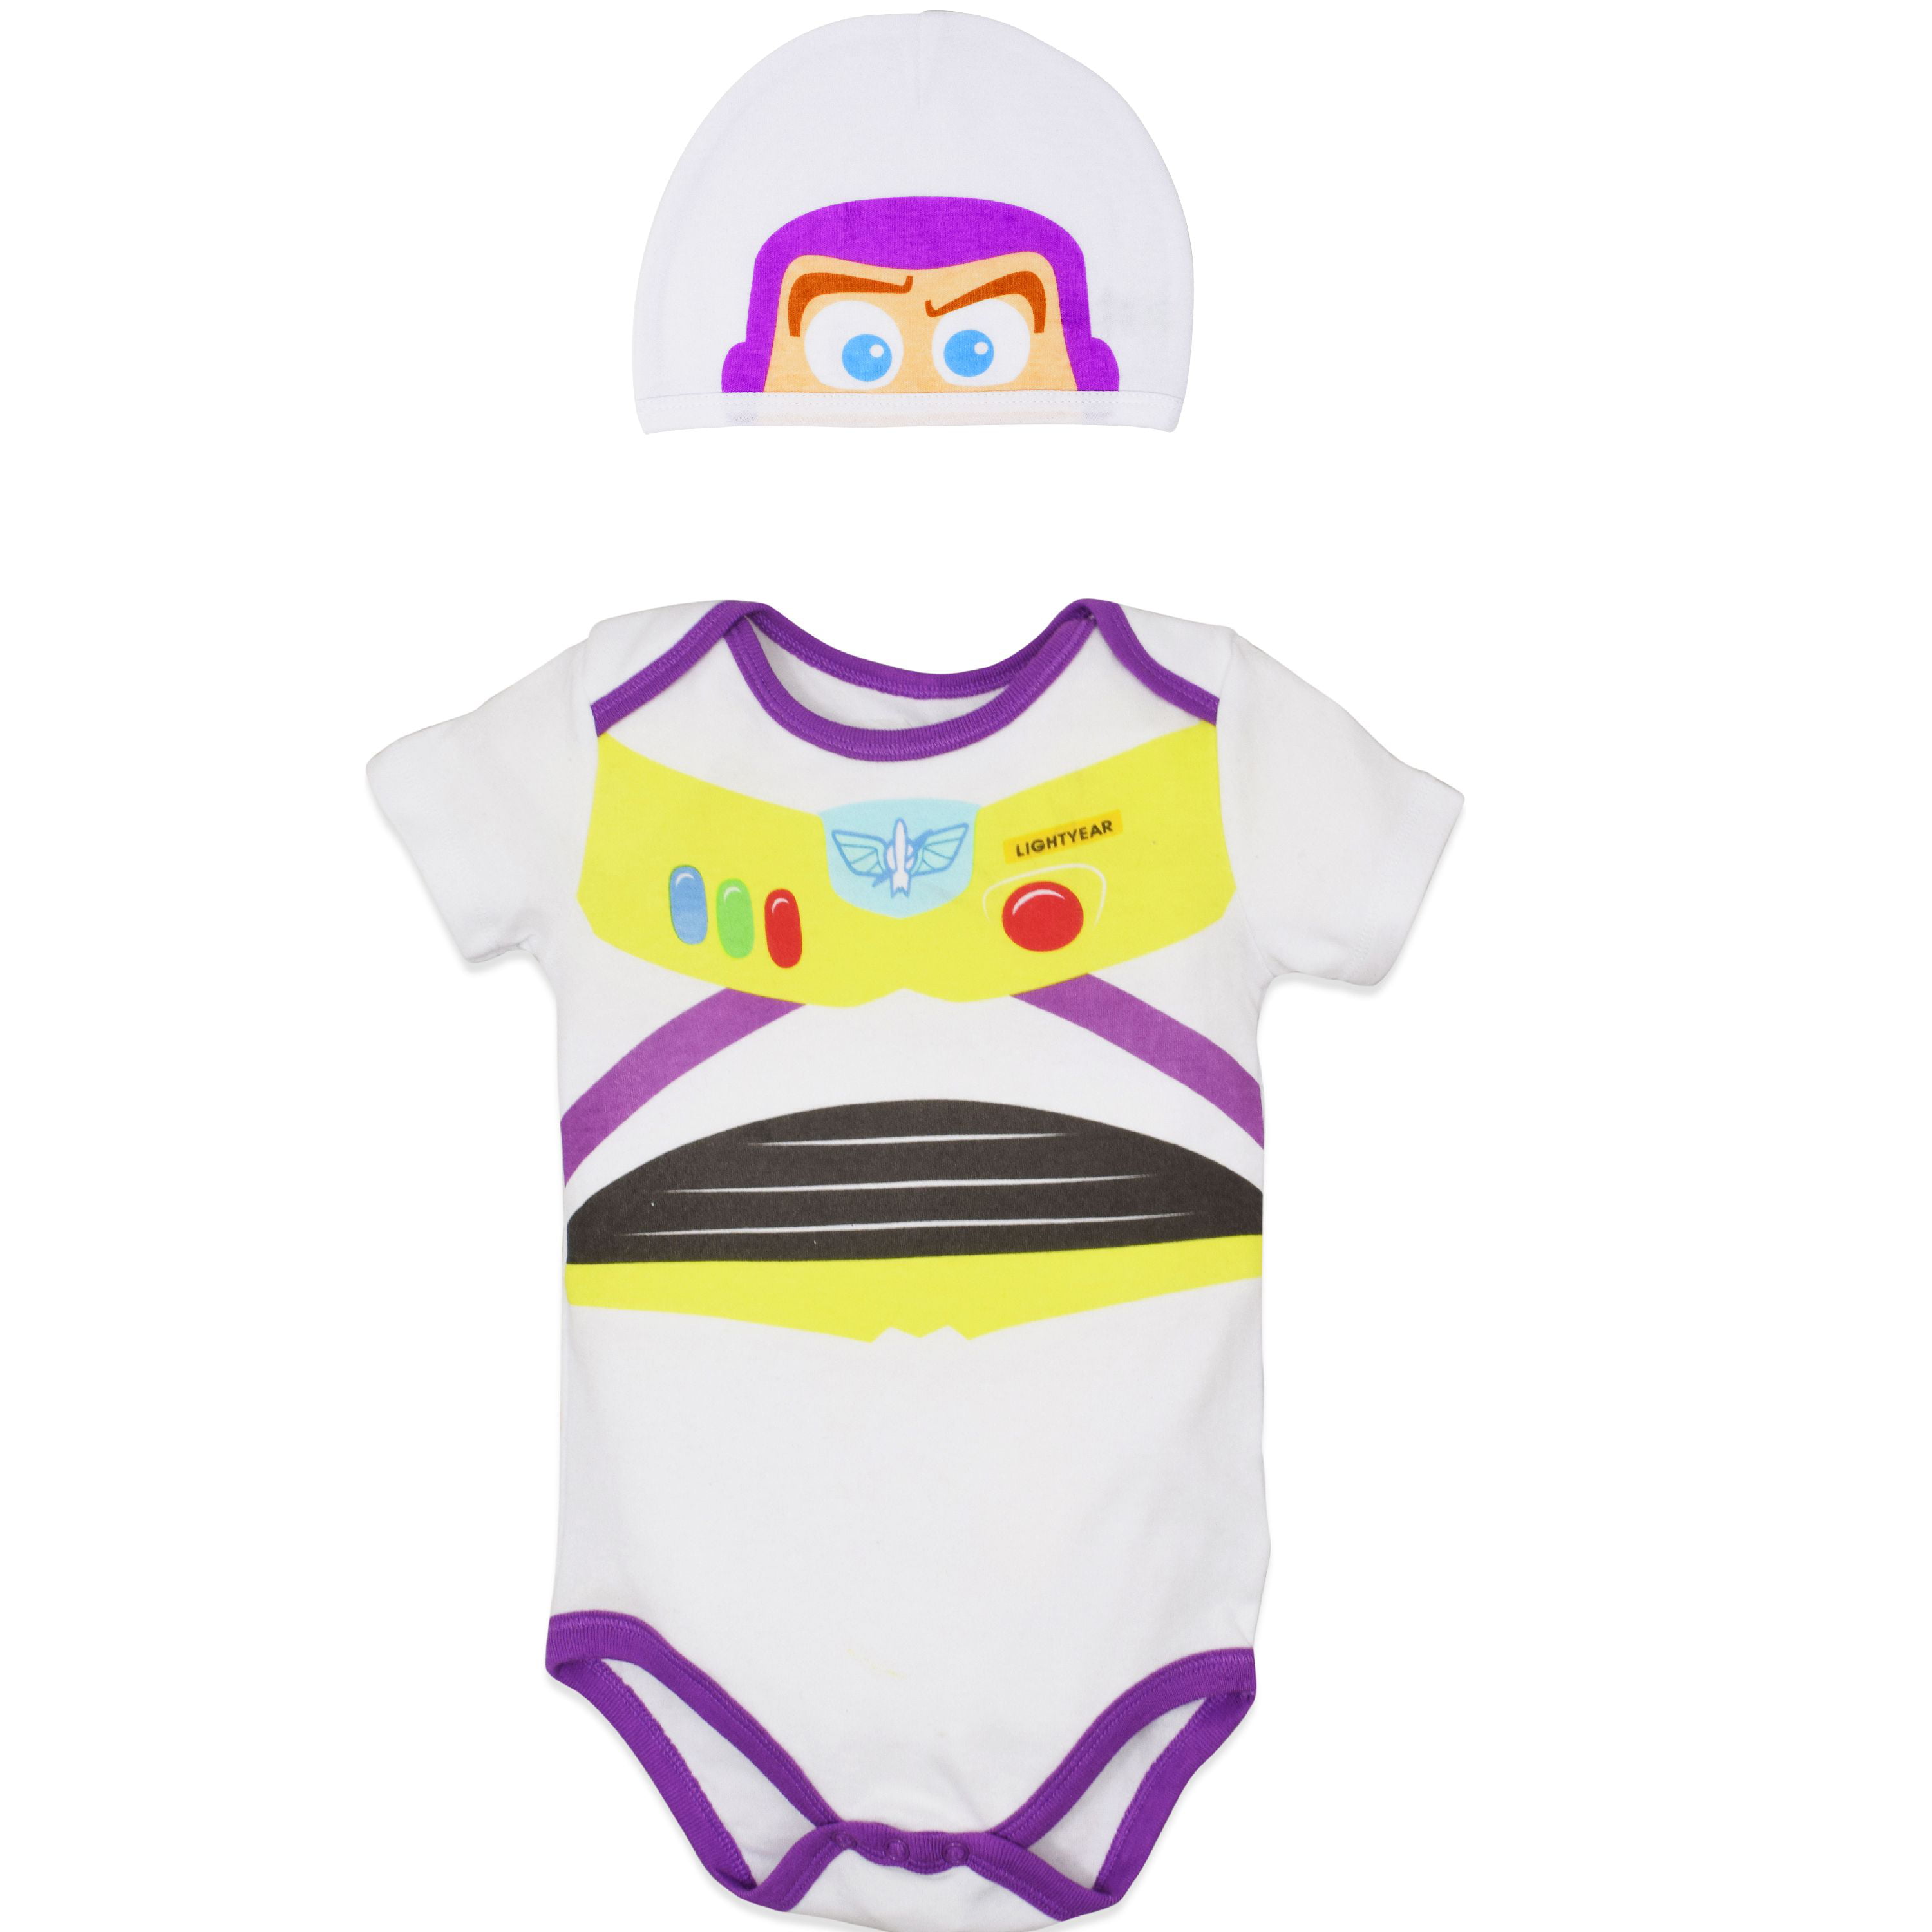 NWT Disney Store 18/24 M Boy Toy Story Buzz Lightyear Costume Outfit 